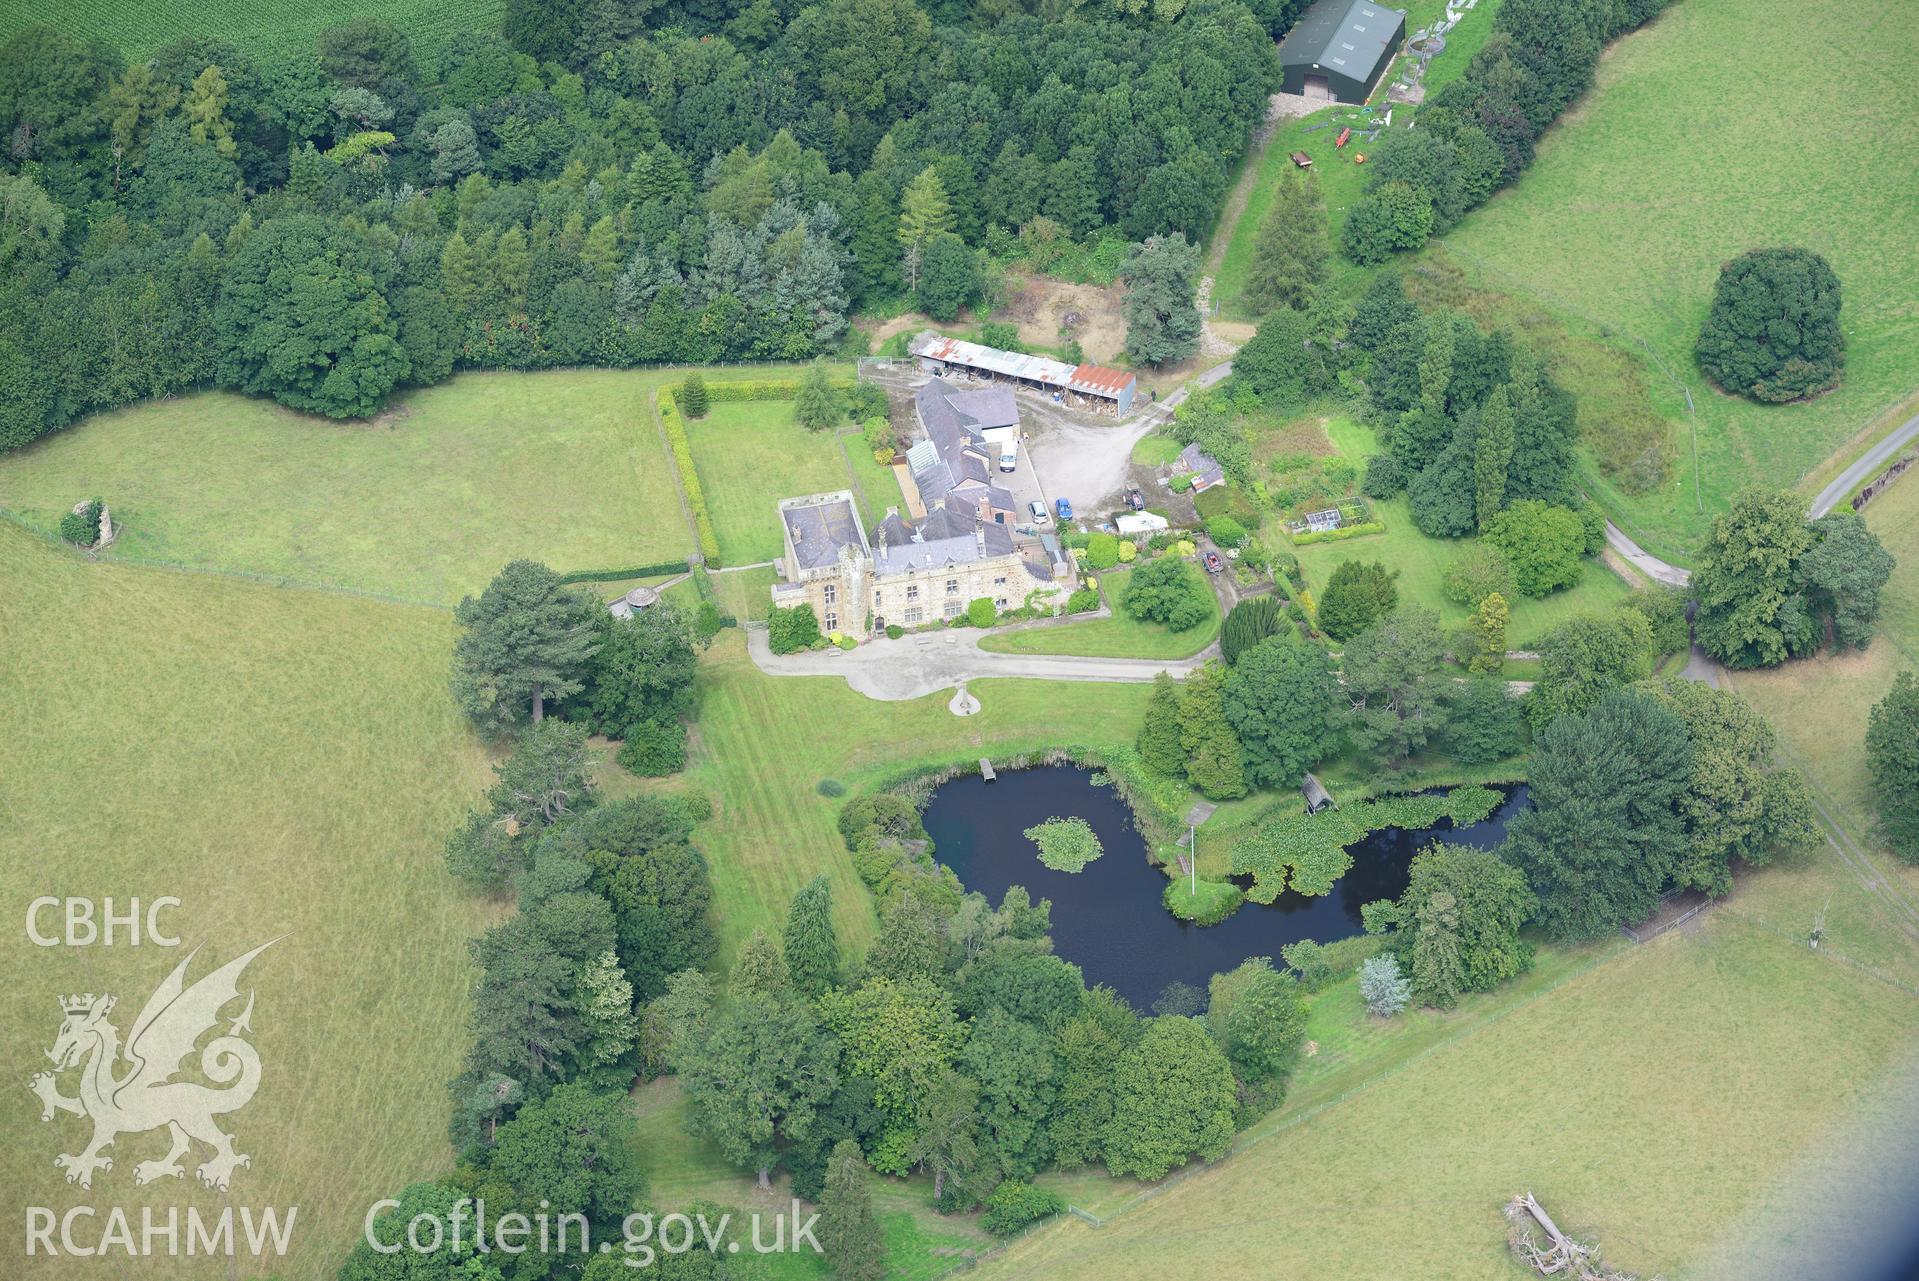 The Tower, Tower garden and dovecote, Broncoed. Oblique aerial photograph taken during the Royal Commission's programme of archaeological aerial reconnaissance by Toby Driver on 30th July 2015.